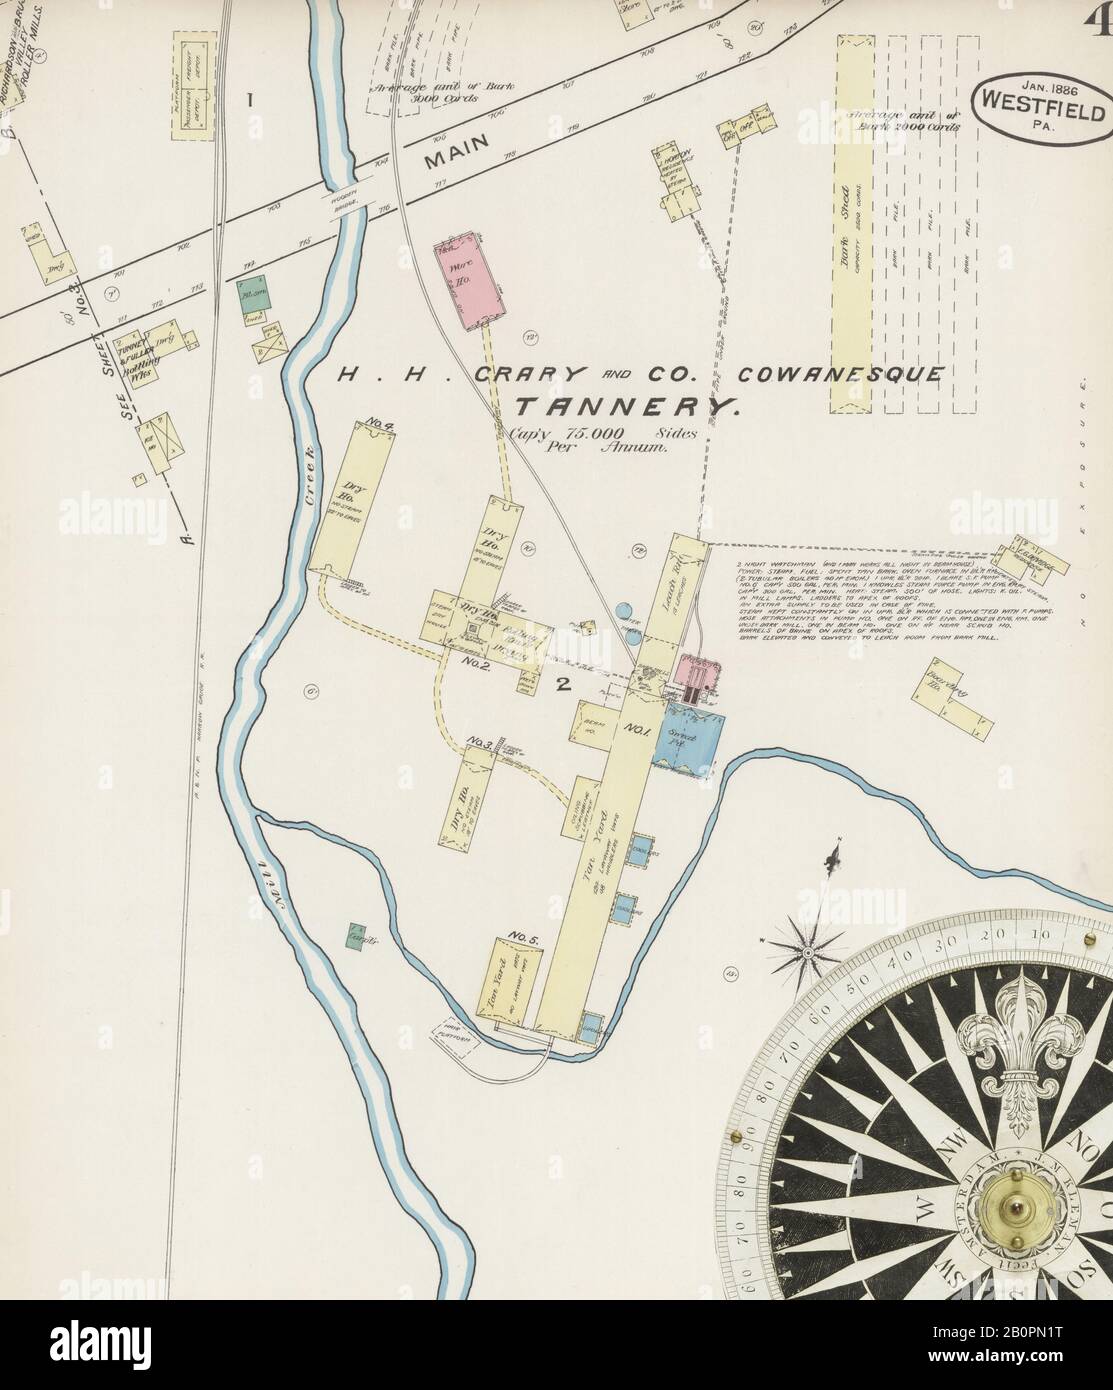 Image 4 of Sanborn Fire Insurance Map from Westfield, Tioga County, Pennsylvania. Jan 1886. 4 Sheet(s), America, street map with a Nineteenth Century compass Stock Photo